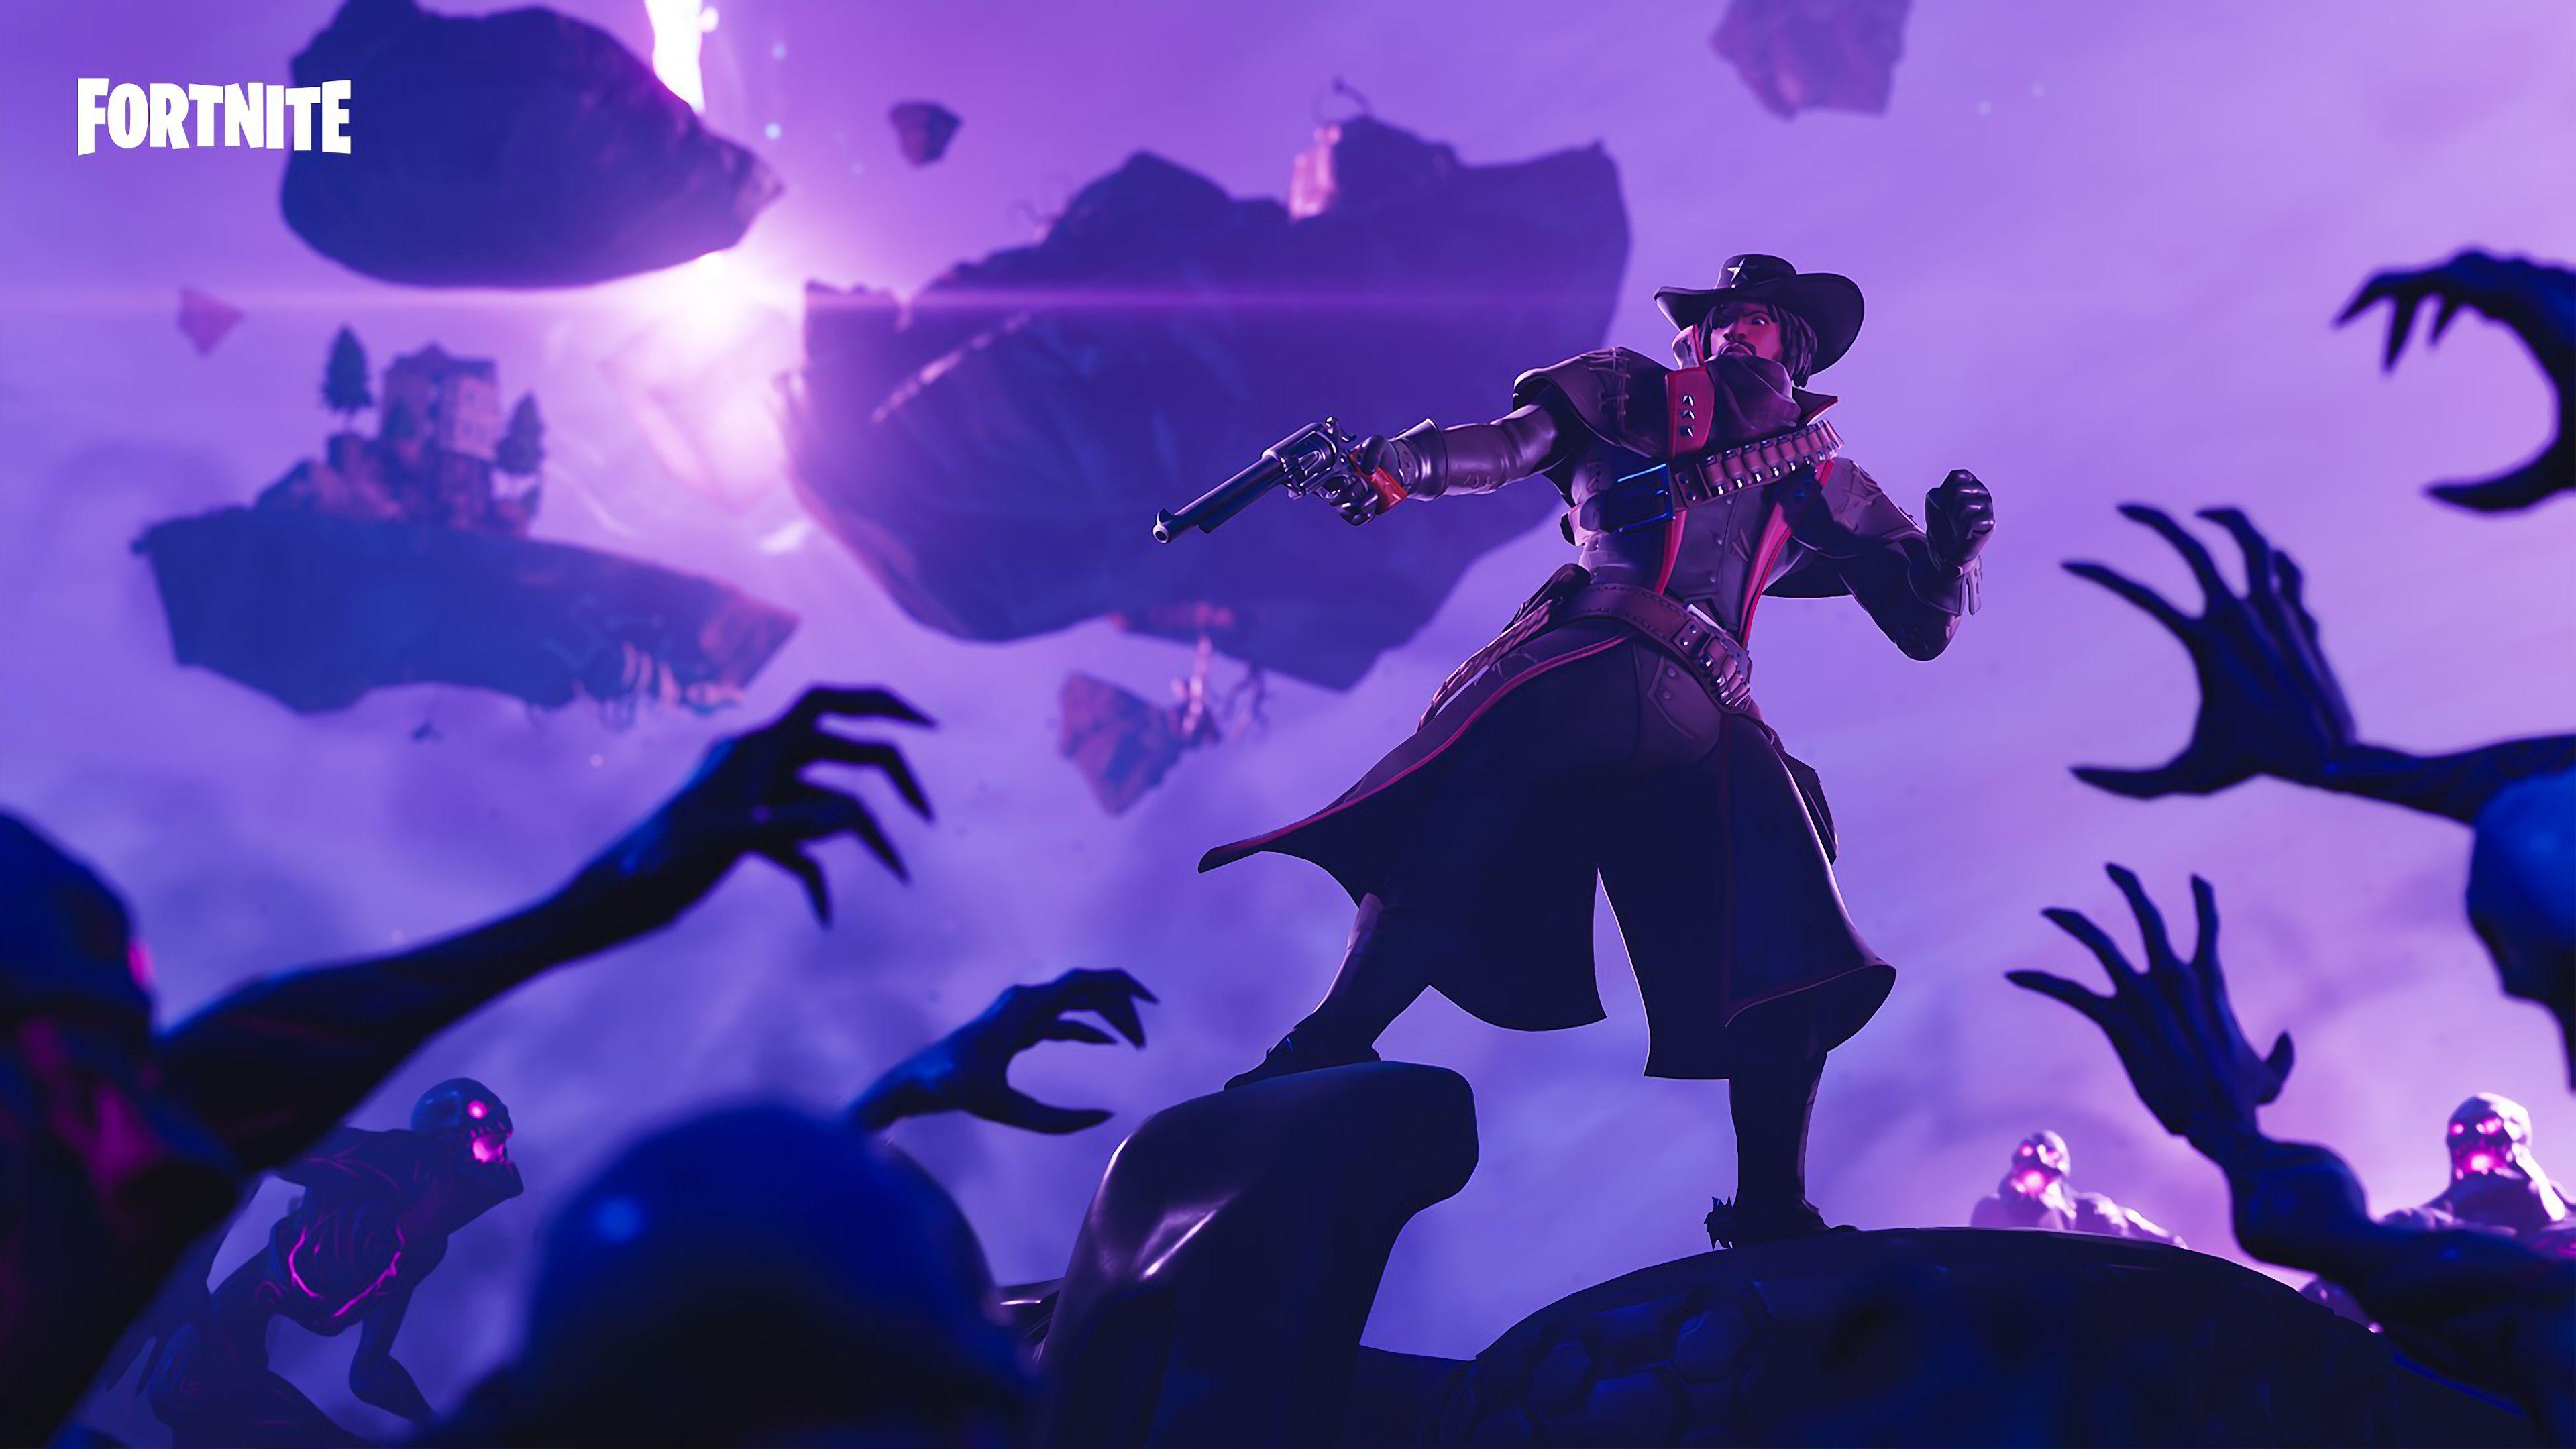 Download Fortnite Calamity HD Background Images Wallpaper  GetWallsio